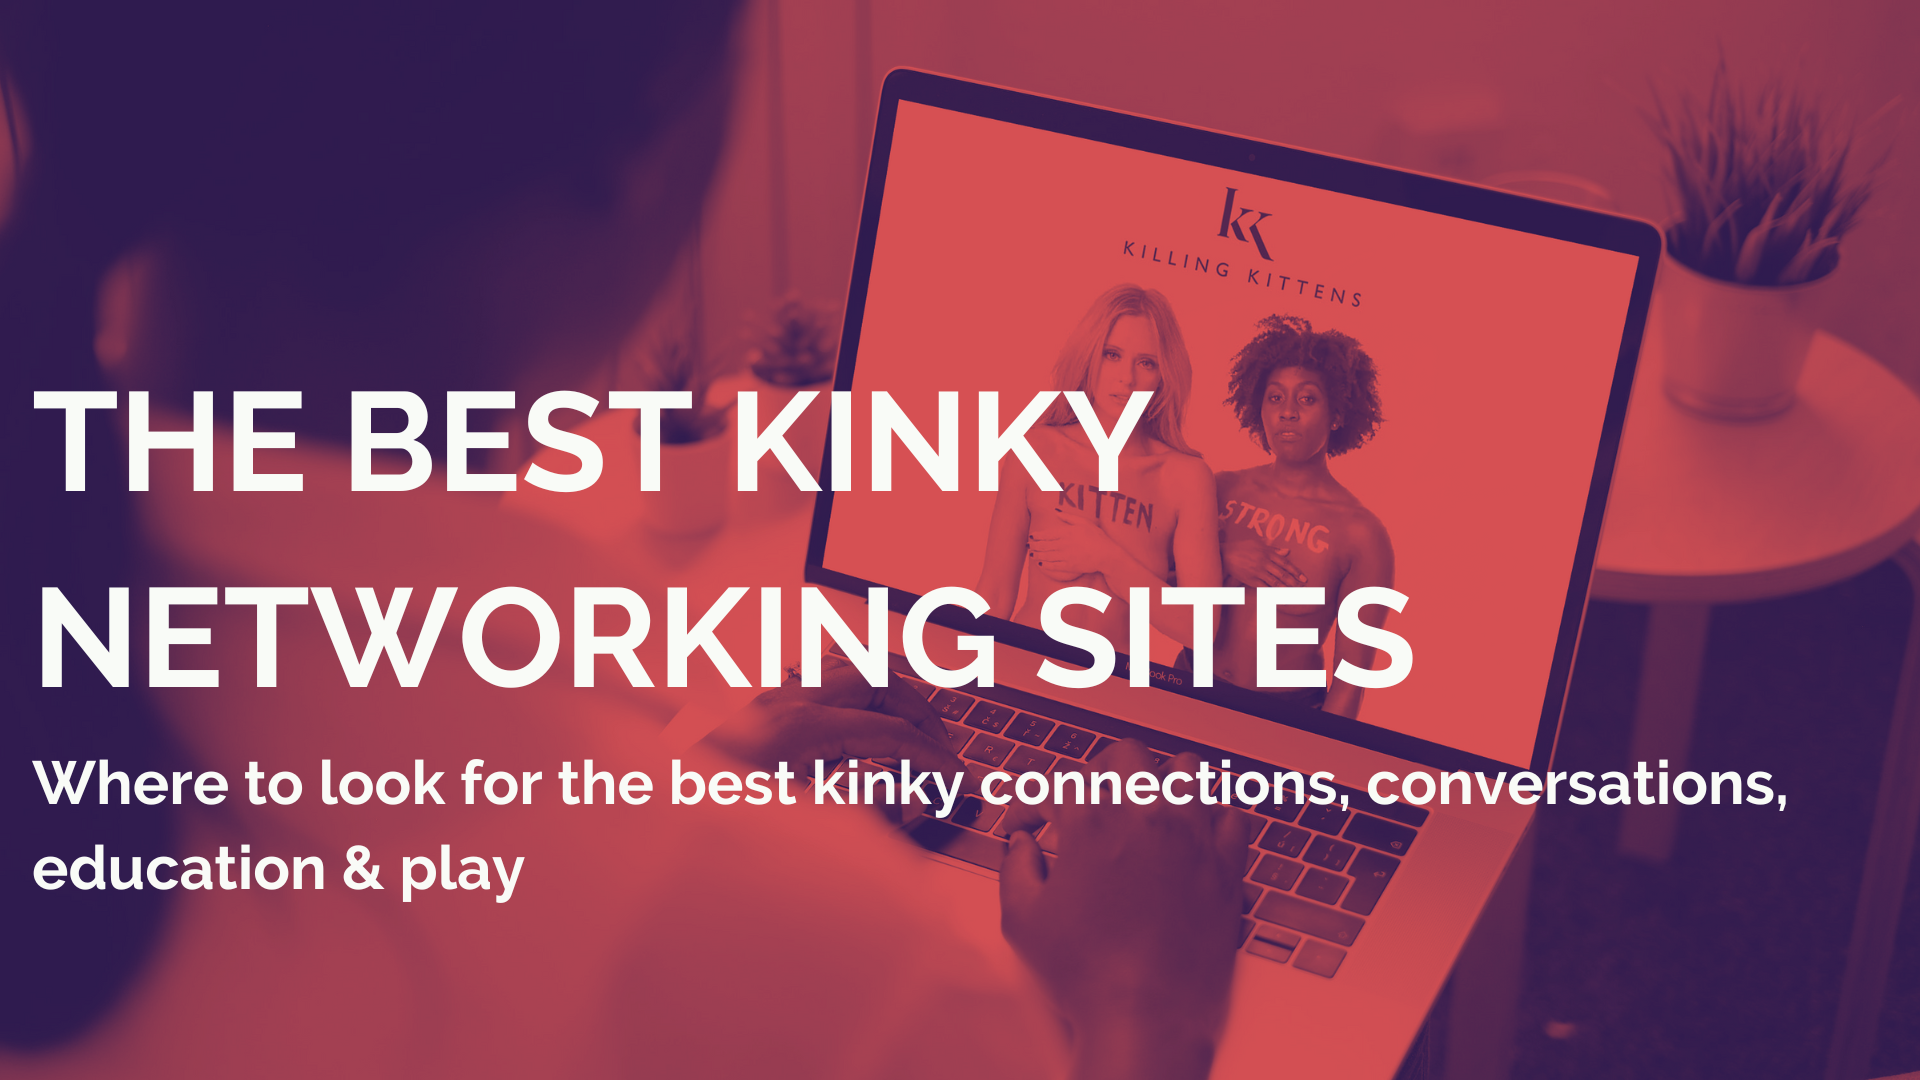 The best kinky networking sites